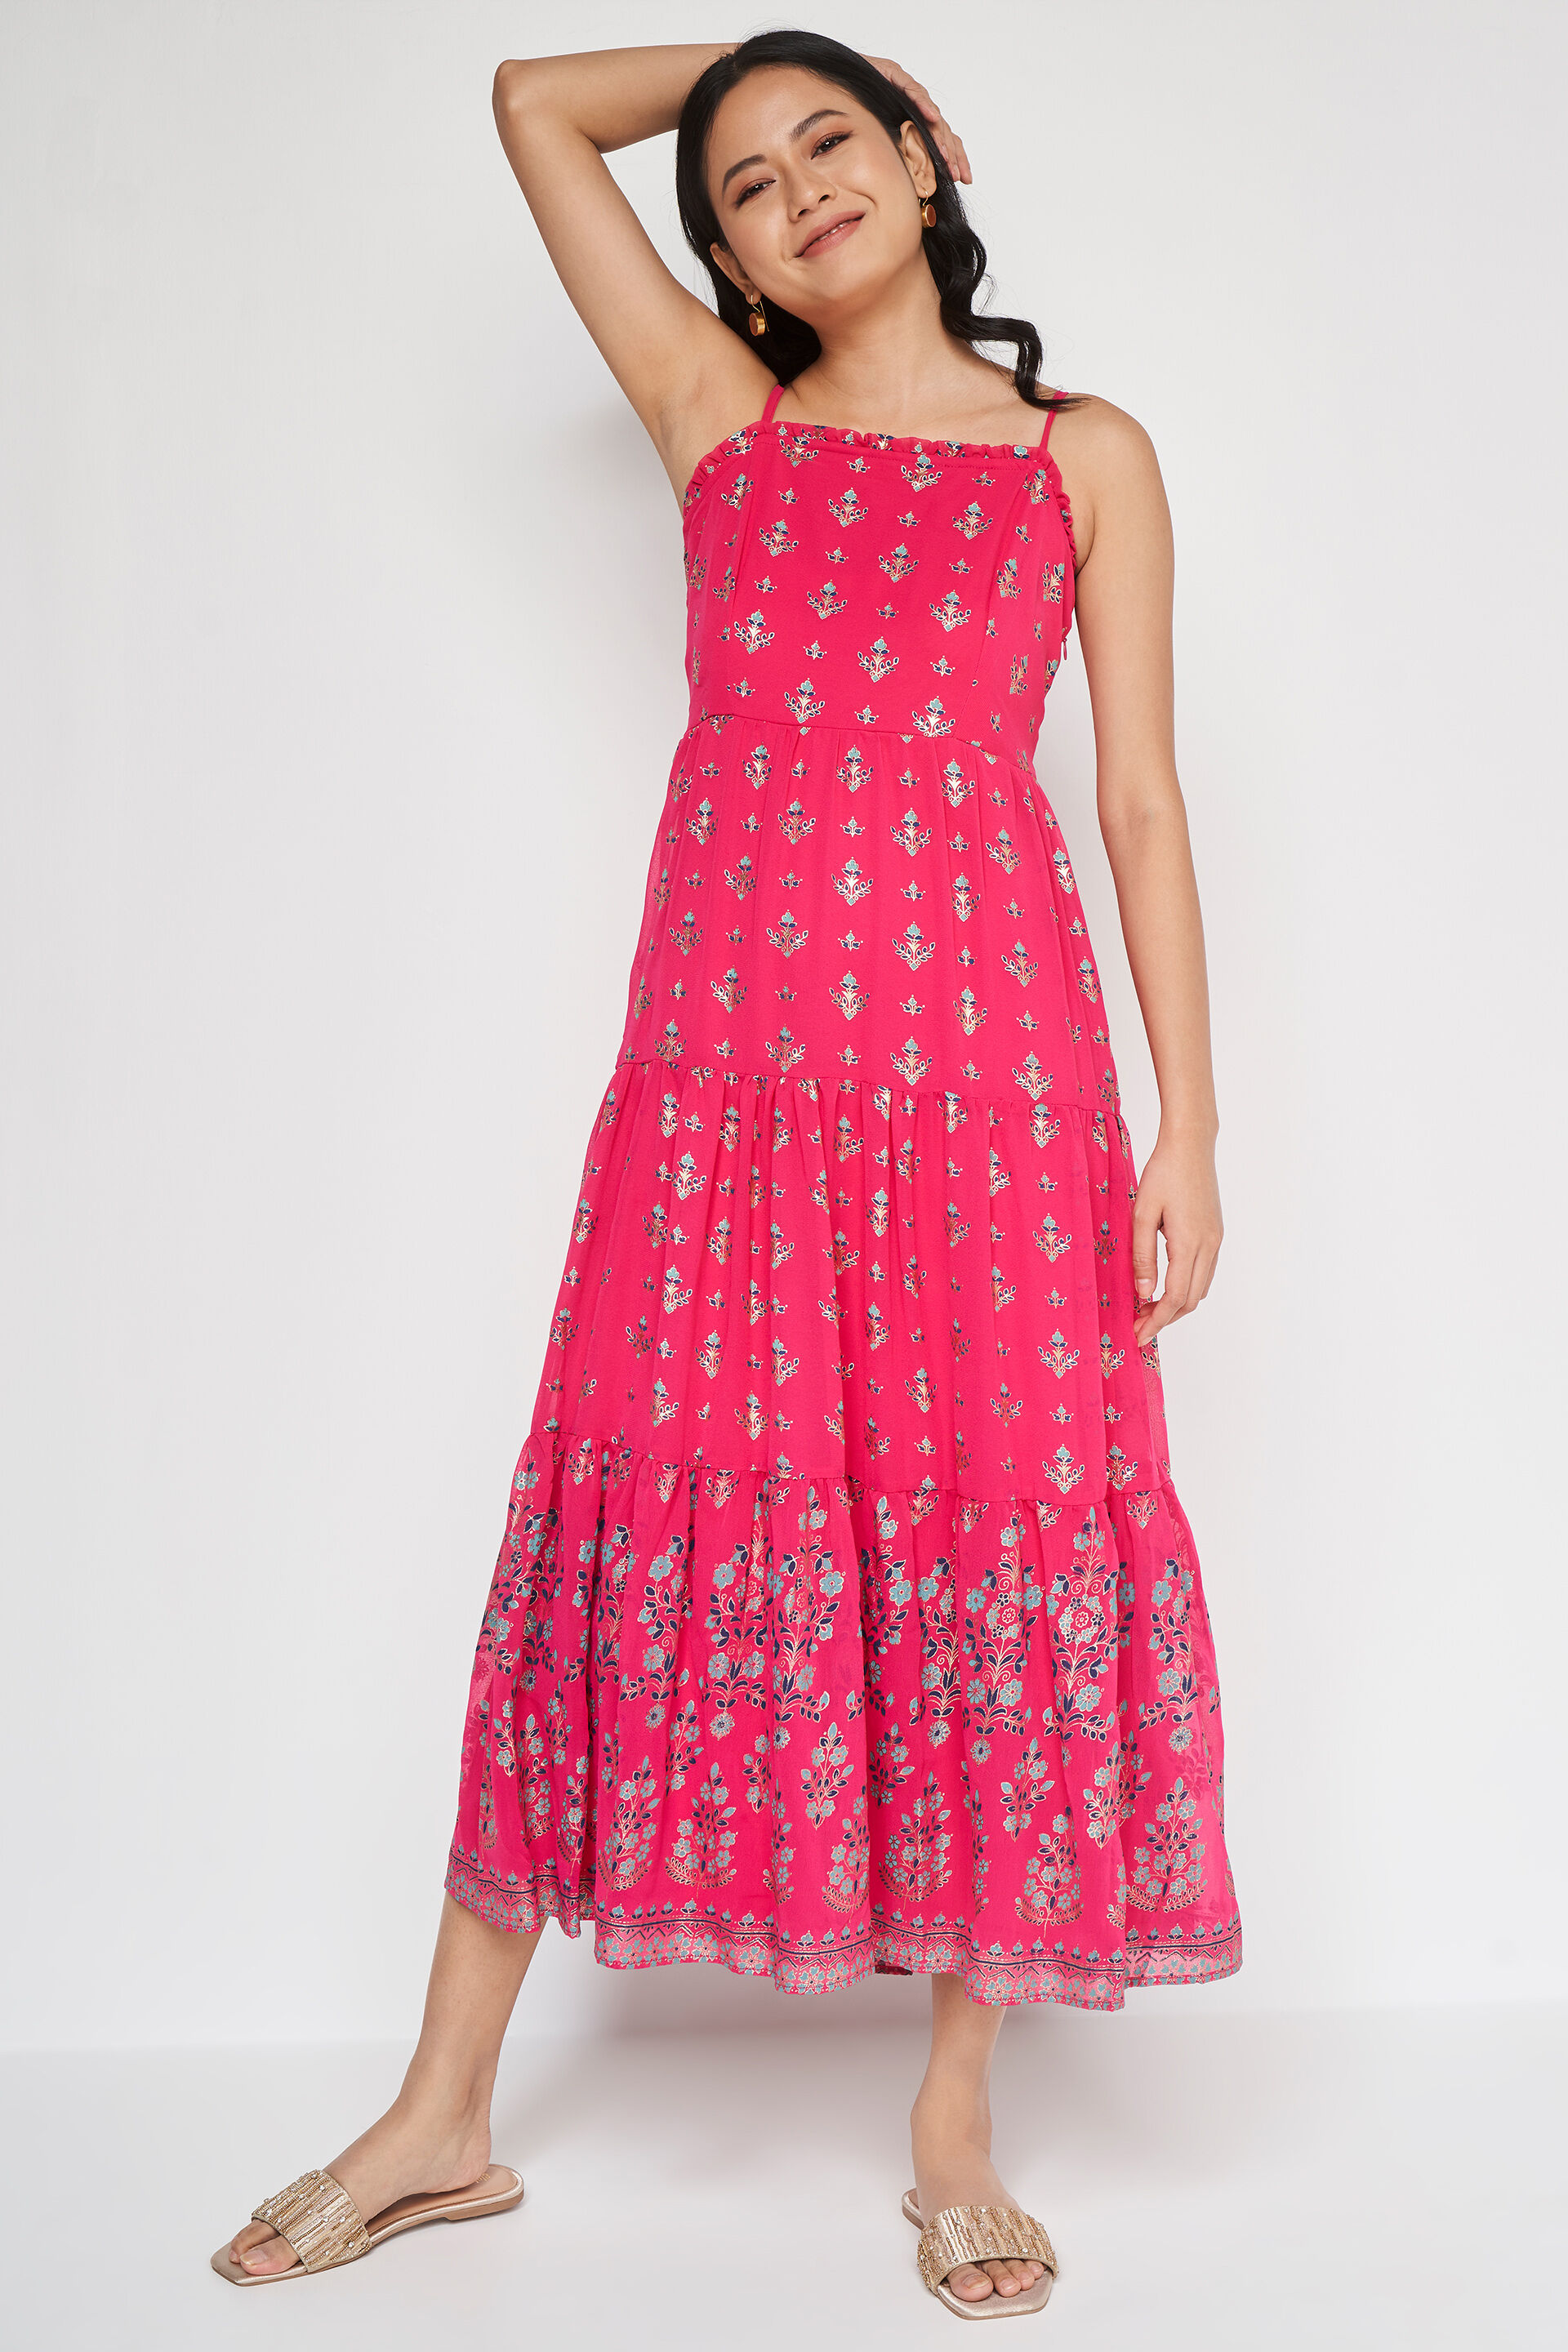 dress on myntra | Evening gowns, Fashion outfits, Dress